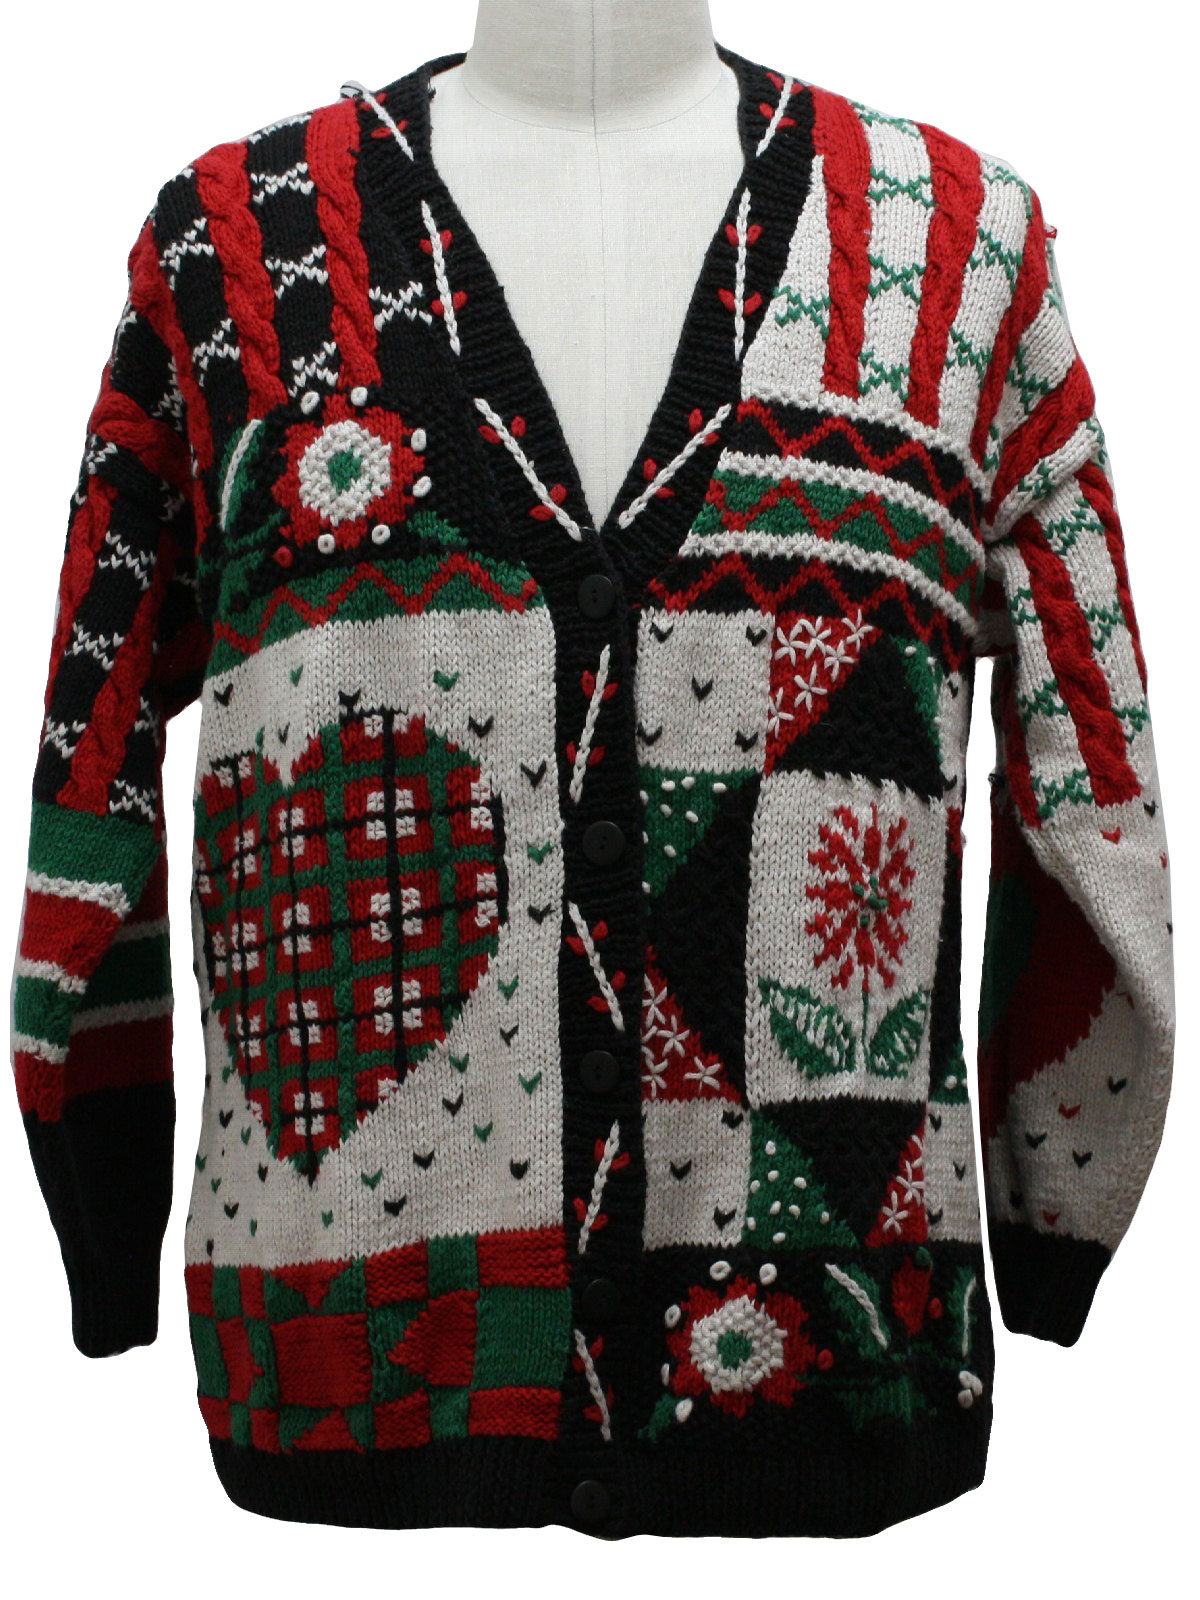 Country Kitsch Ugly Christmas Sweater: -Susan Bristol- Unisex black ...